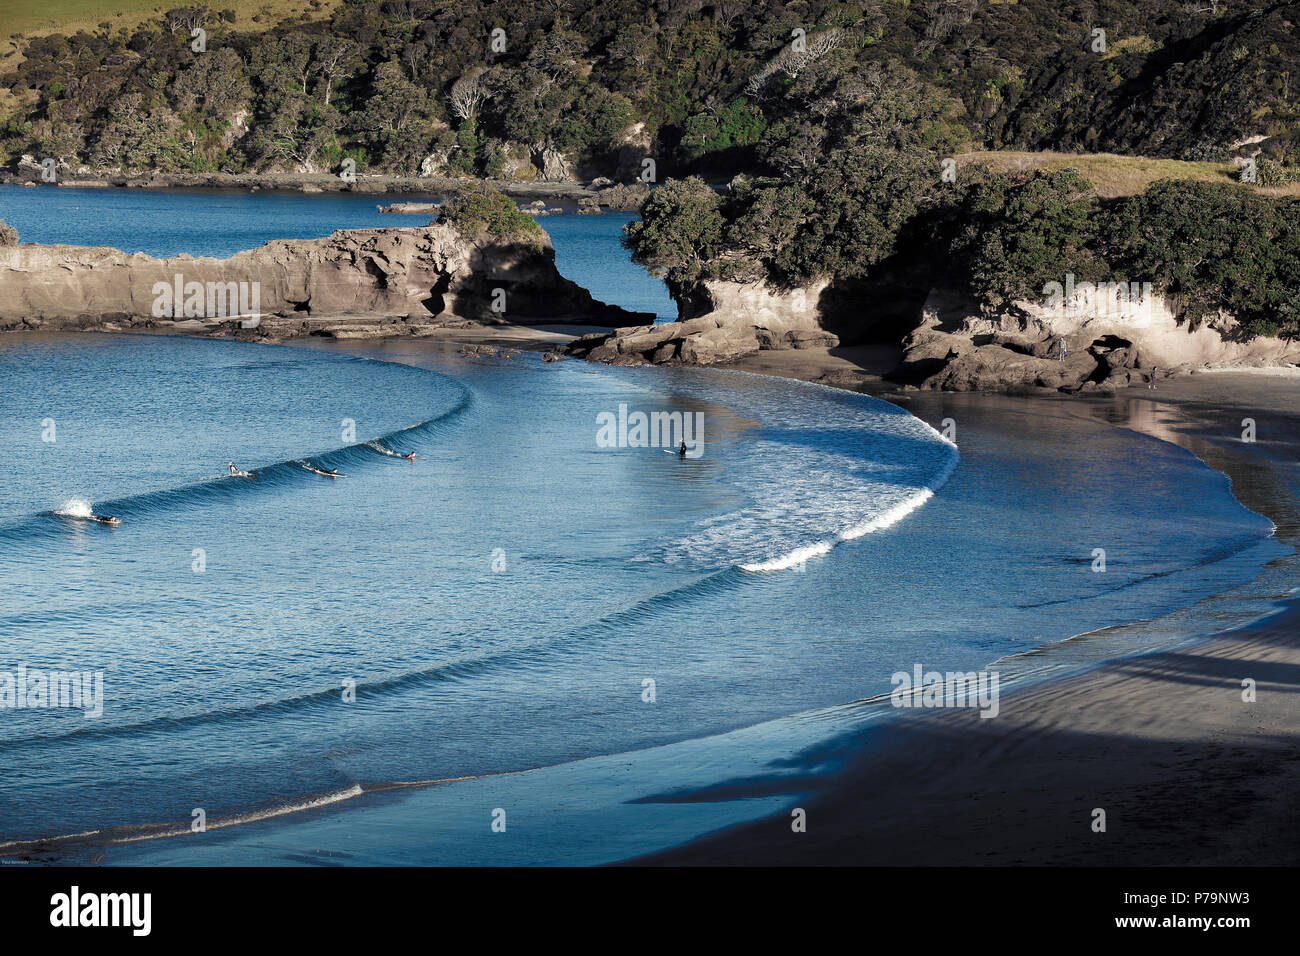 Scenic view of people surfing at Tawharanui beach, New Zealand Stock Photo